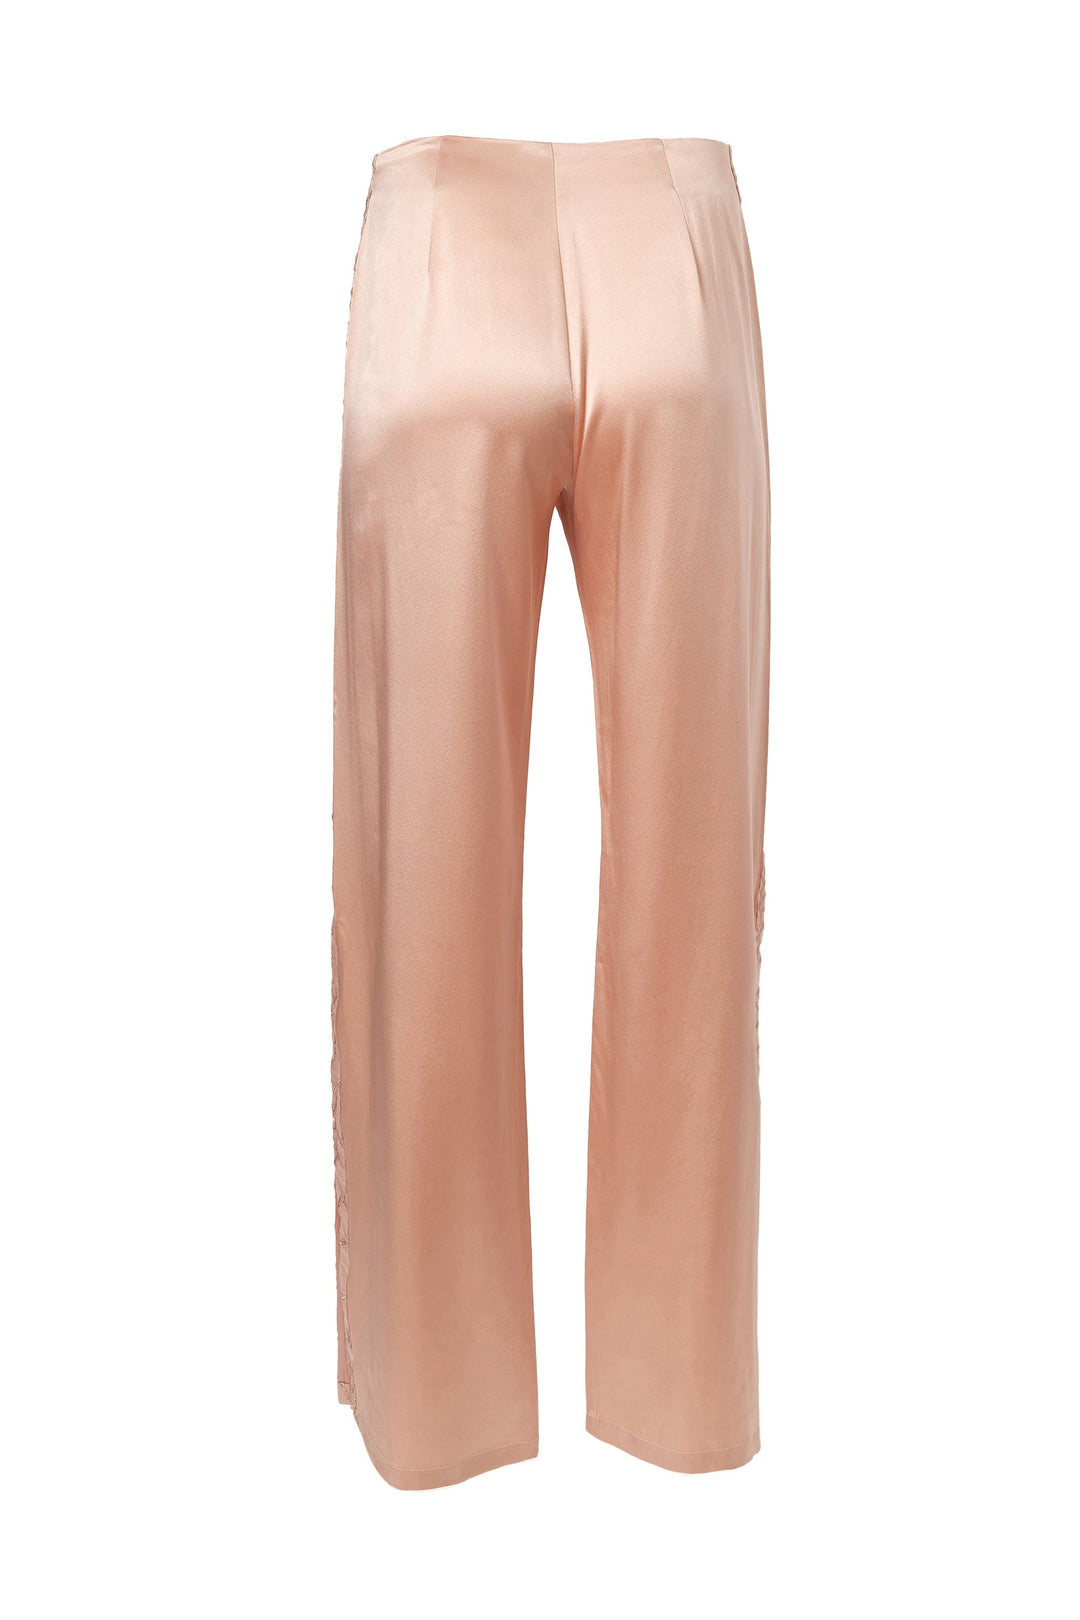 Silk & Lace Side Slit Pant - Rosy Pink